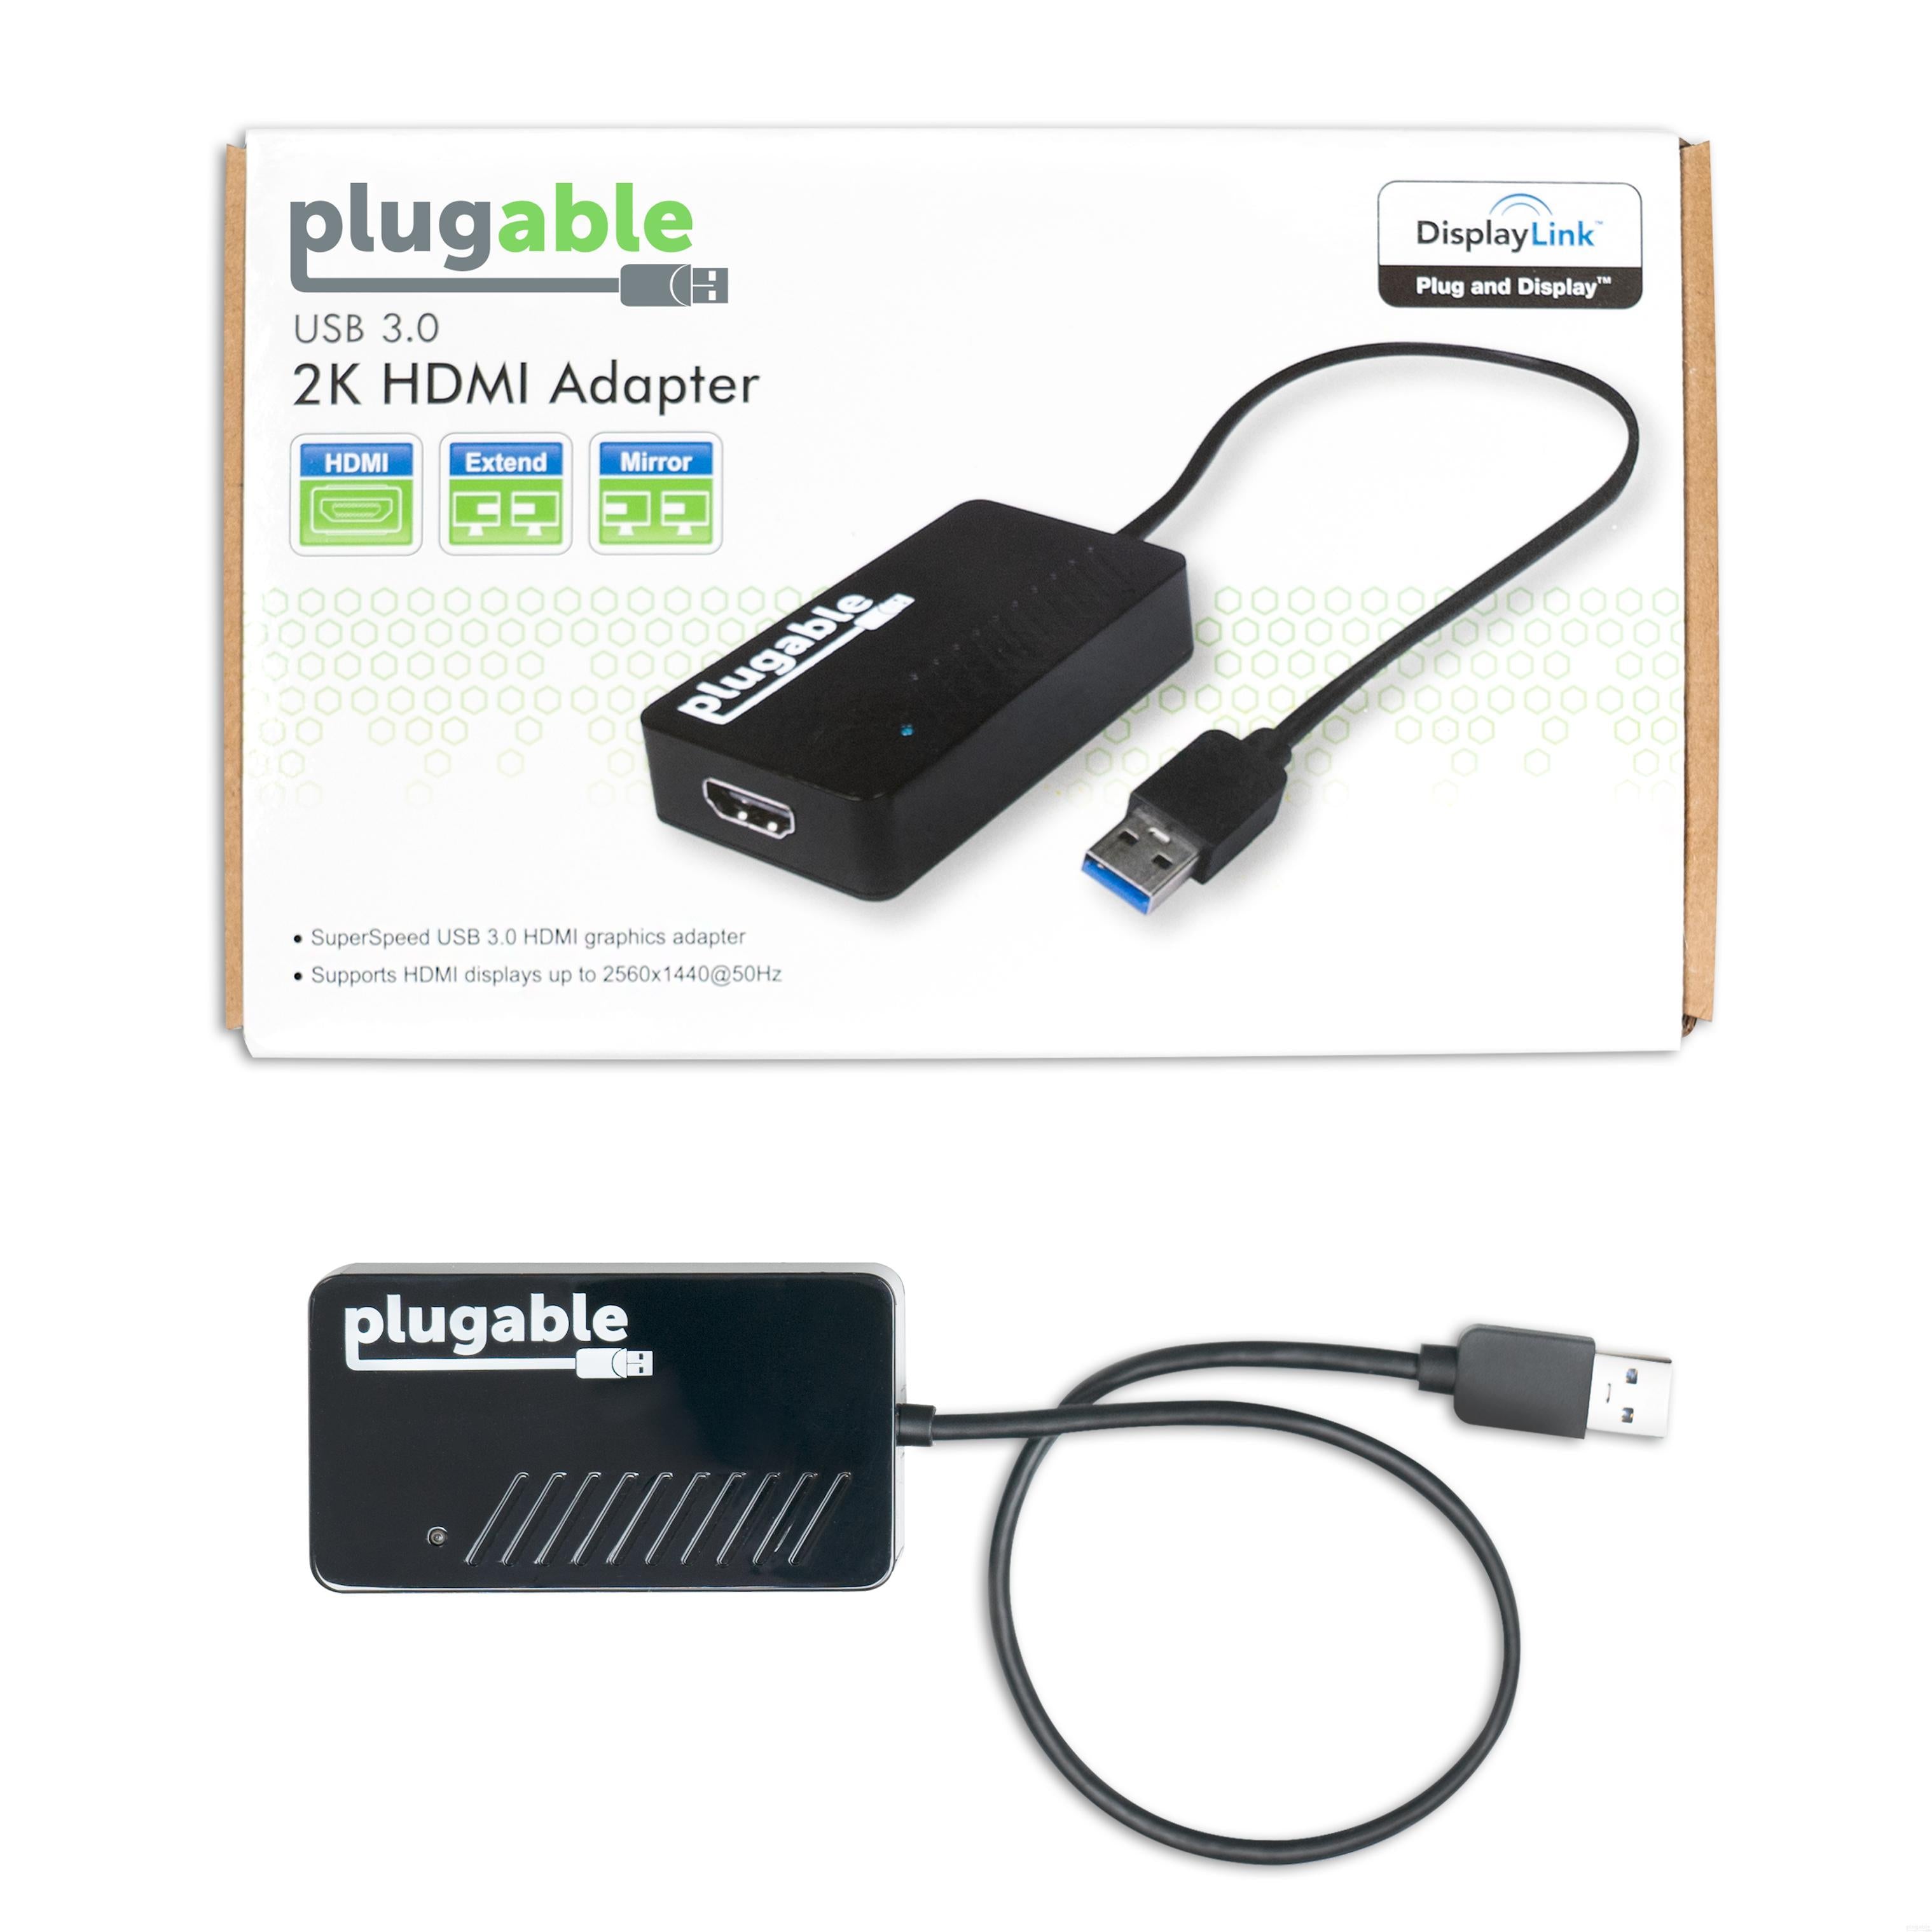 Plugable USB 3.0 to 2K HDMI Video Graphics Adapter with Audio for